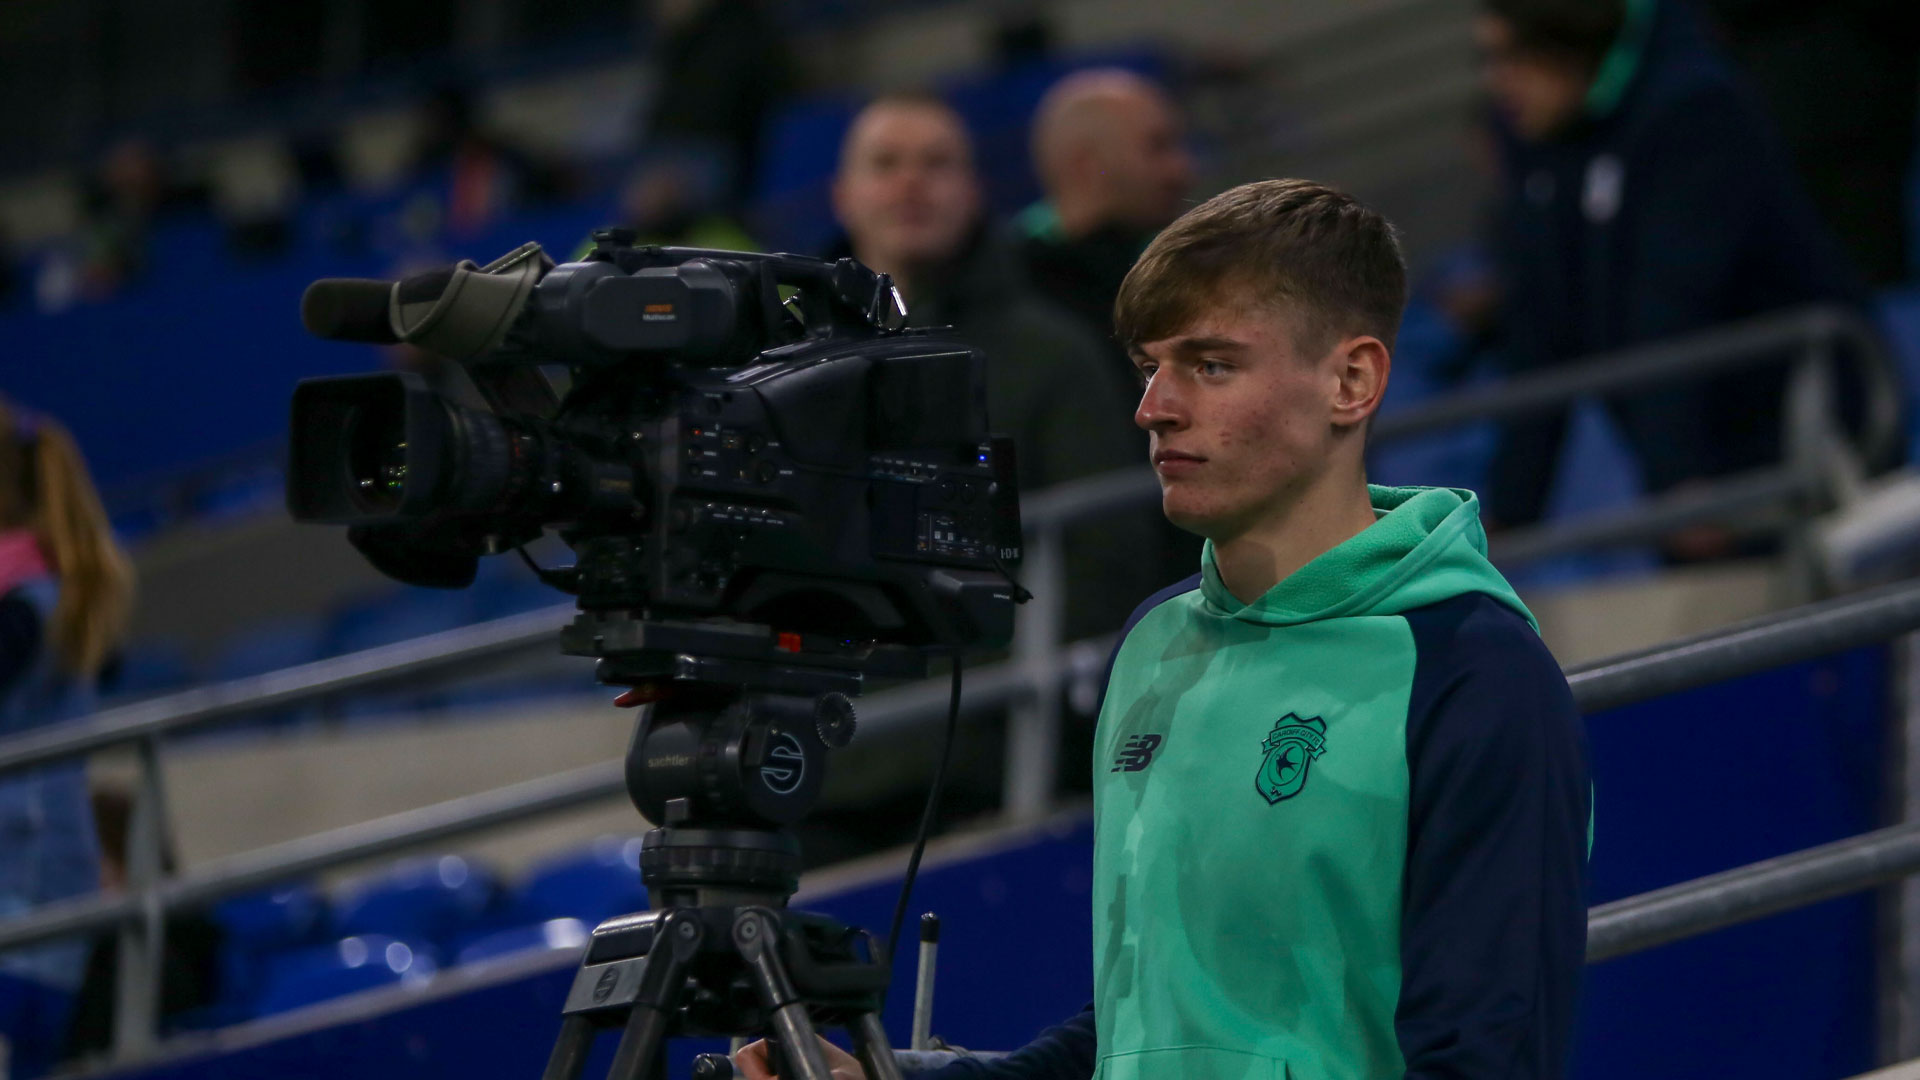 Dylan Lawlor operates a camera